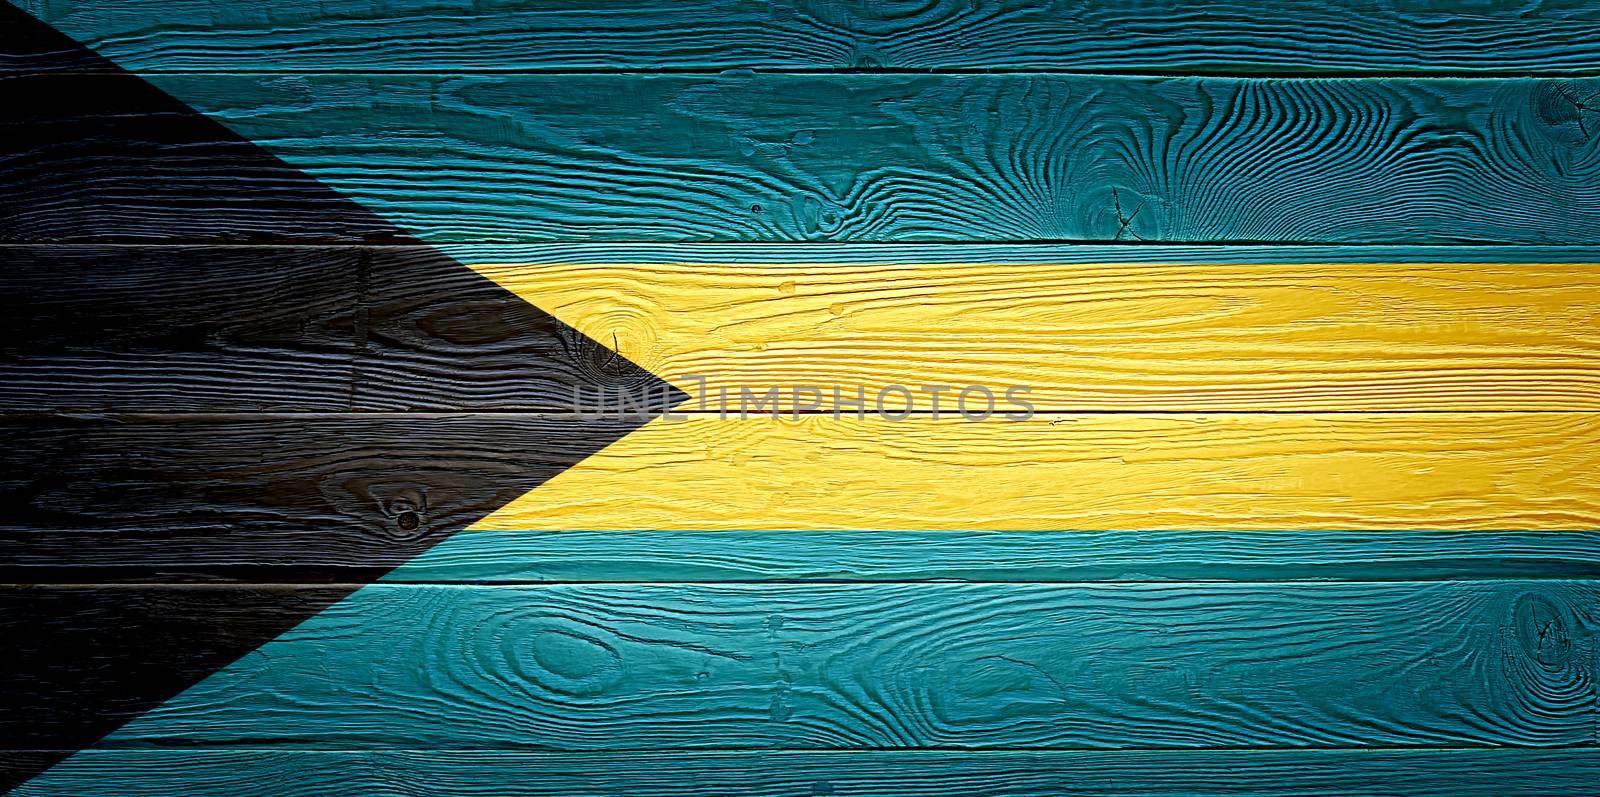 Bahamas flag painted on old wood plank background. Brushed natural light knotted wooden planks board texture. Wooden texture background flag of Bahamas